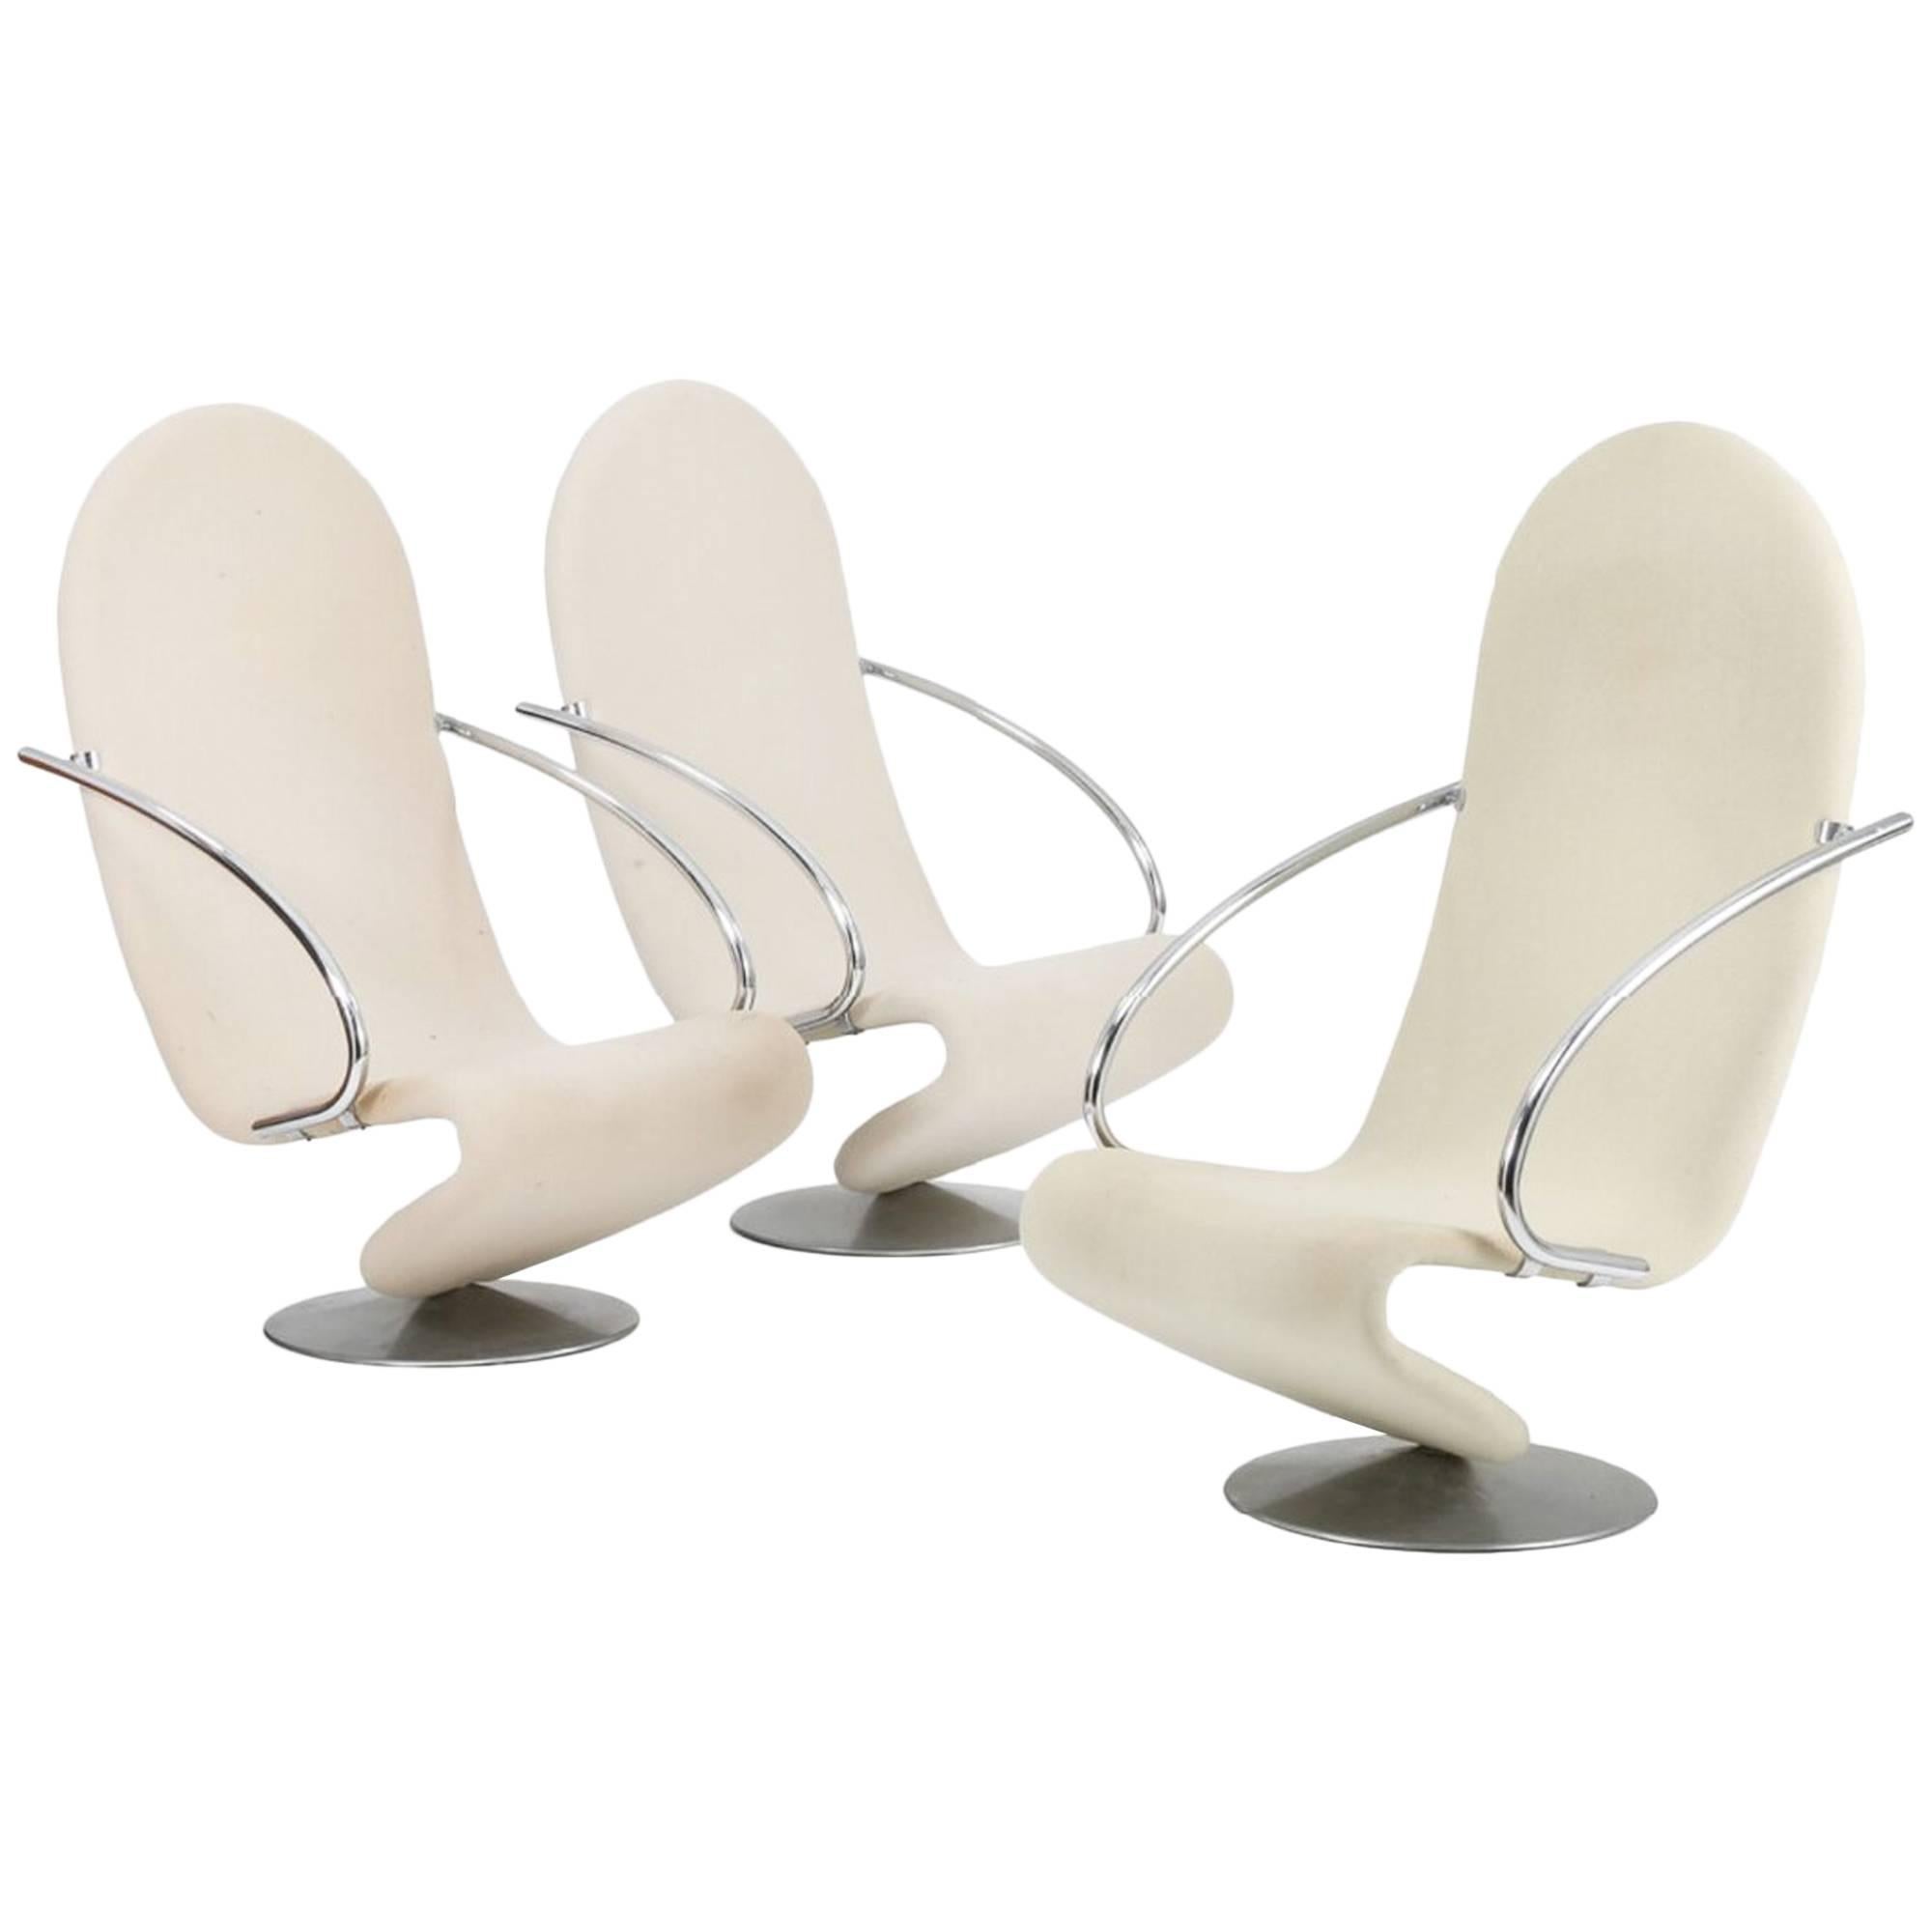 Set of Three ‘3’ System 1–2-3 Easy Armchairs by Verner Panton for Fritz Hansen